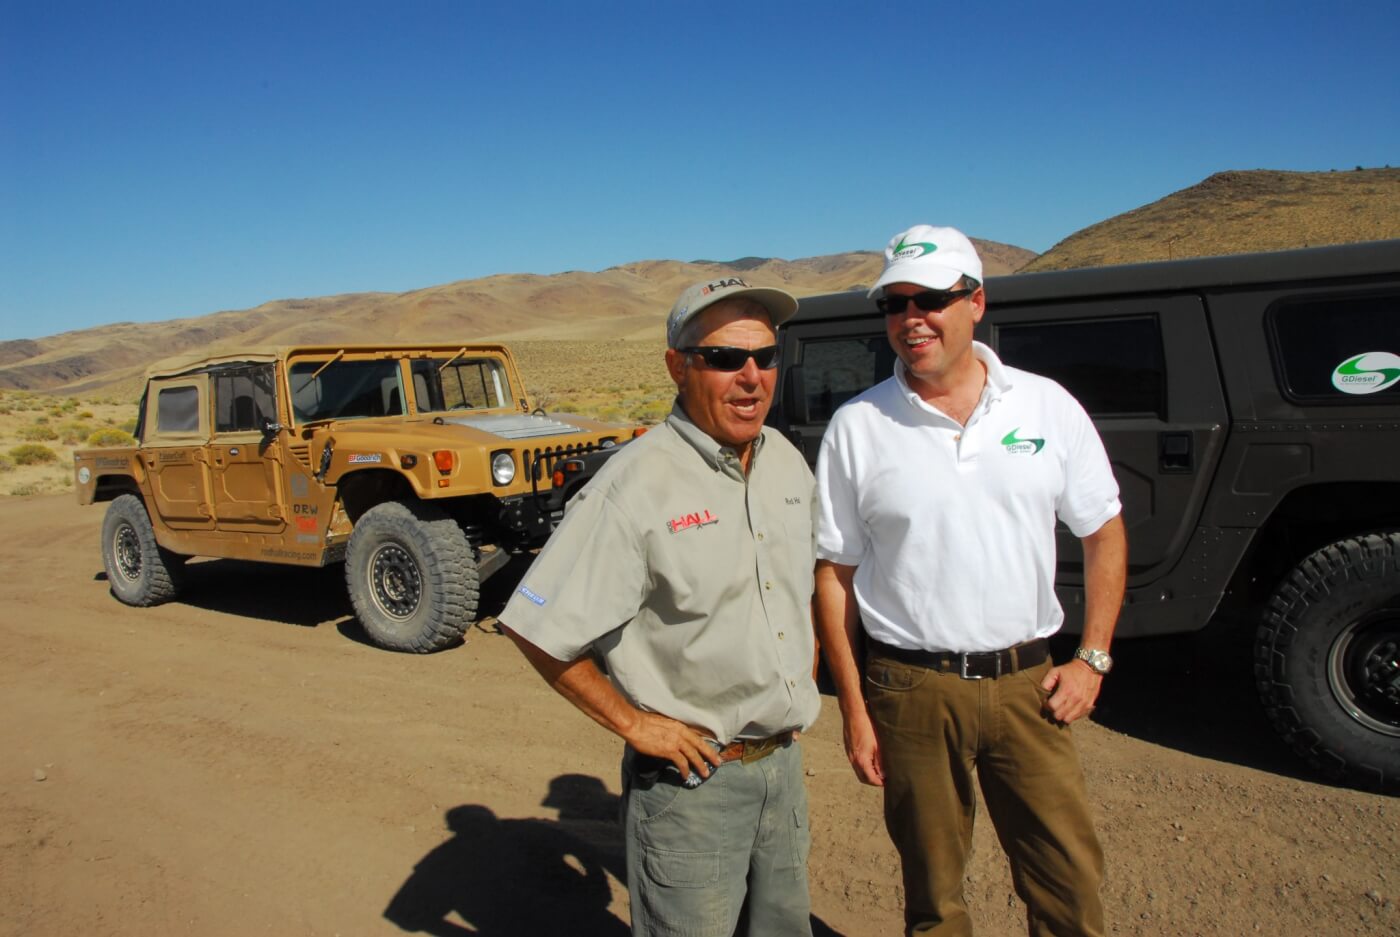 ARC Partner and Director, Peter Gunnerman (right) worked directly with Rod Hall in supplying GDiesel for the off-road school.